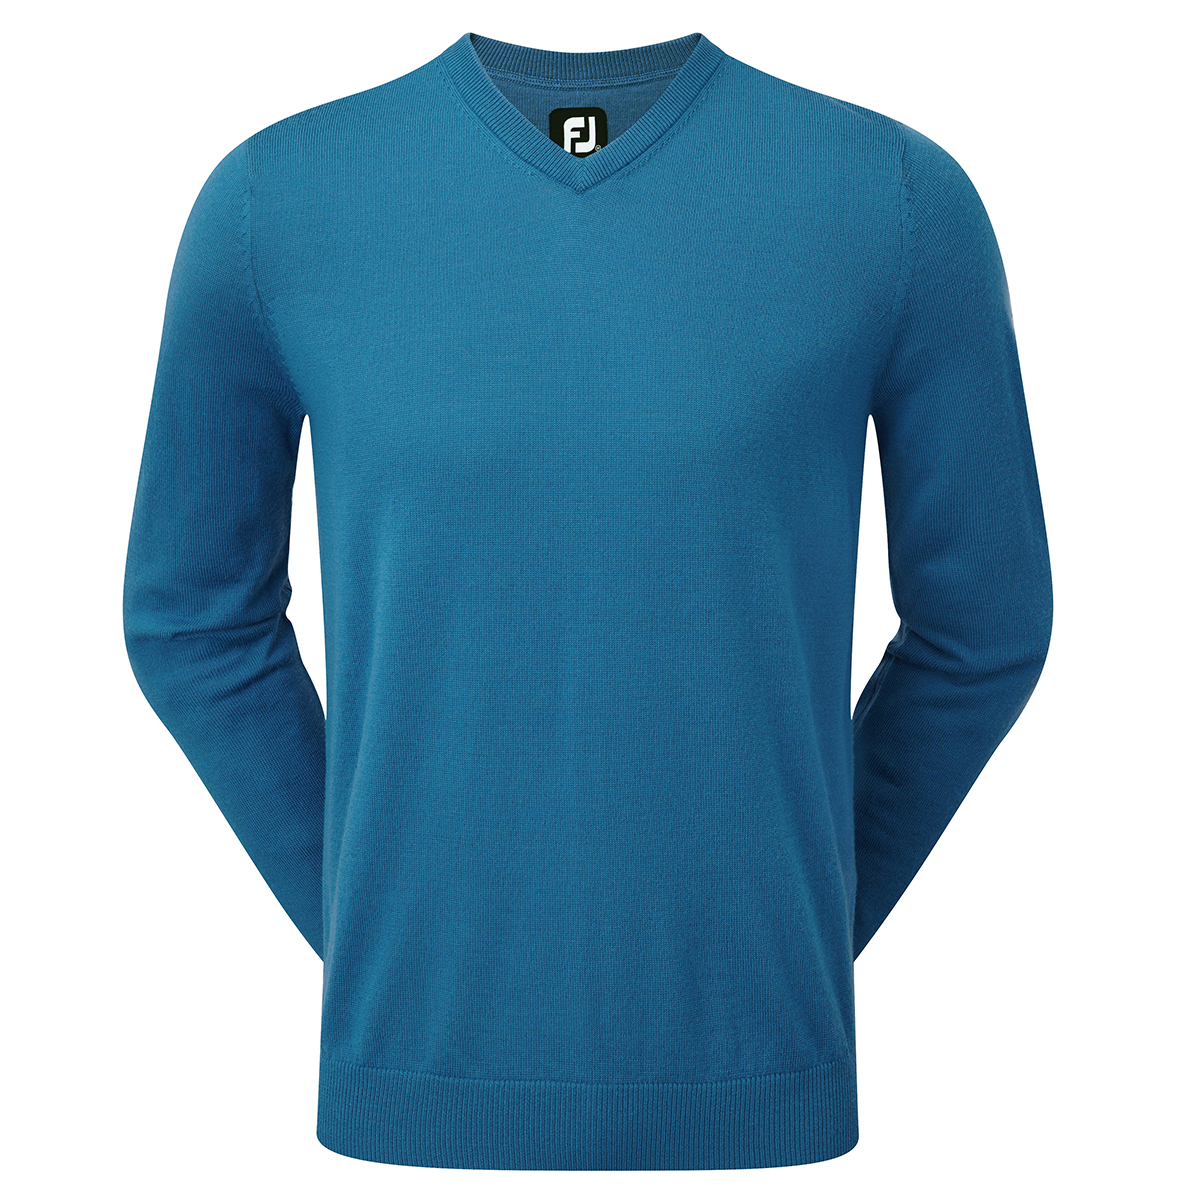 FootJoy Men's Lambswool V Neck Golf Sweater from american golf